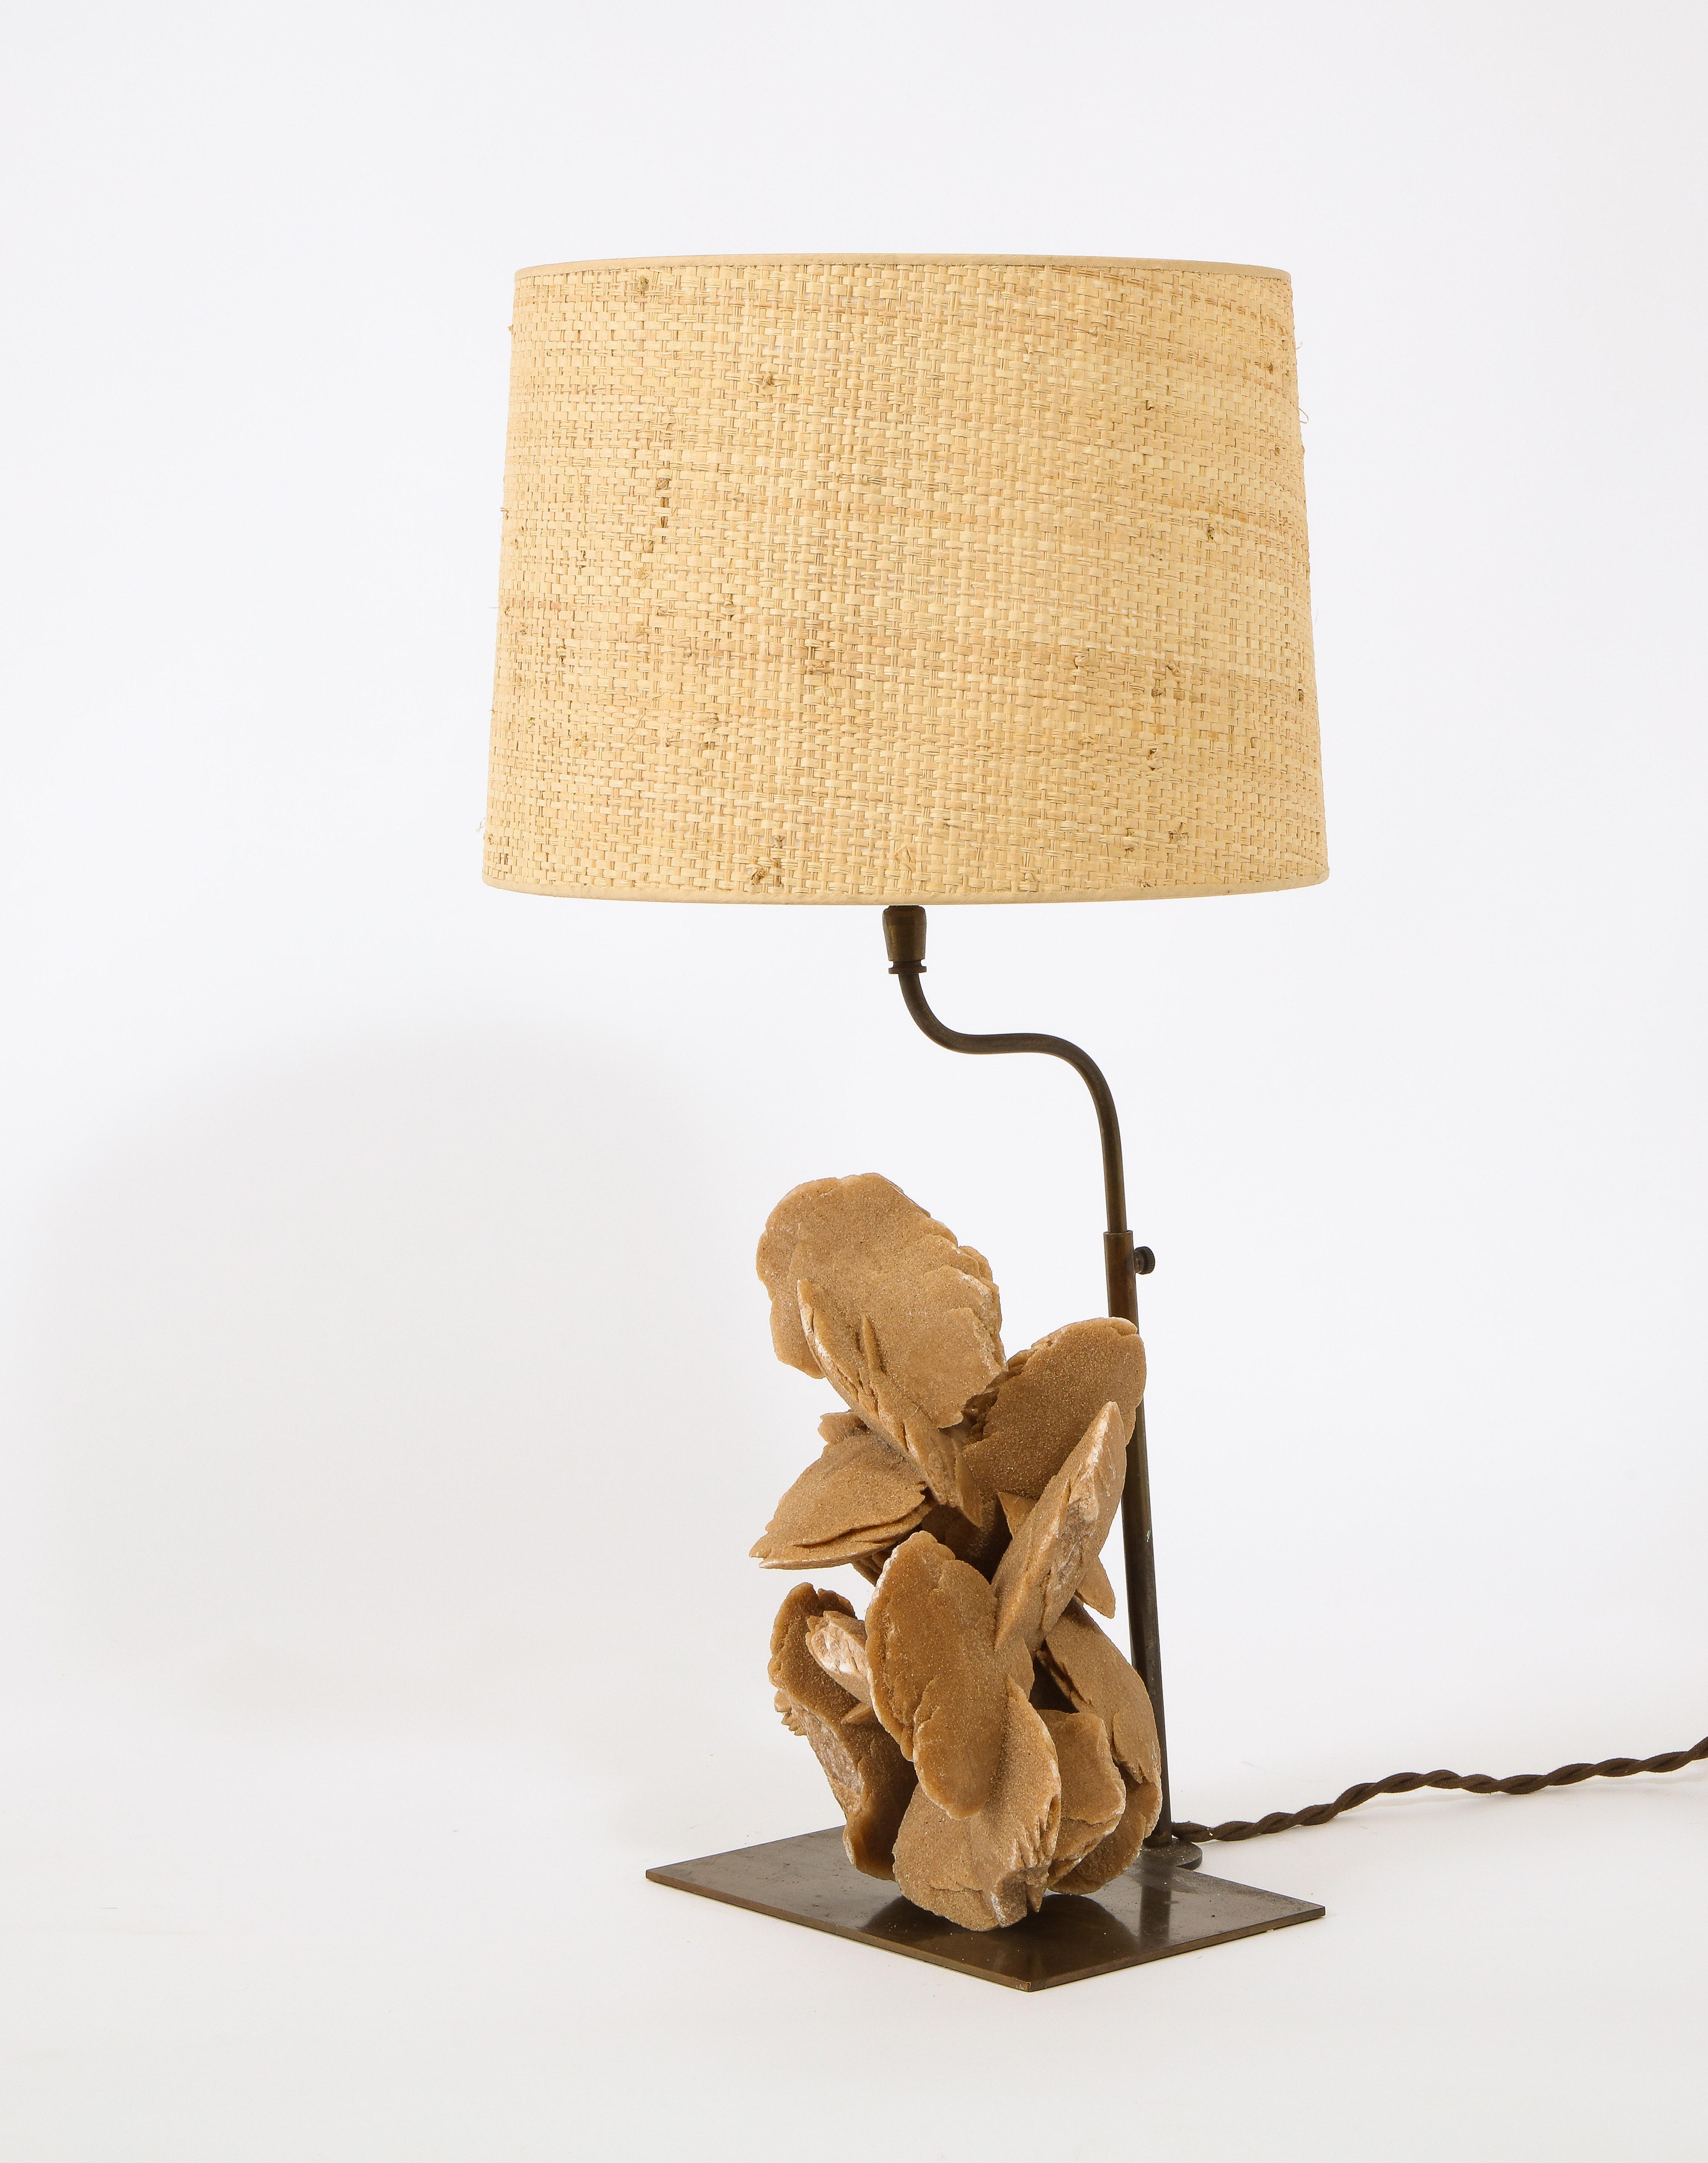 A fascinating lamp using a Selenite mineral known as a Desert Rose mounted on an adjustable brass base.

Shade not included.